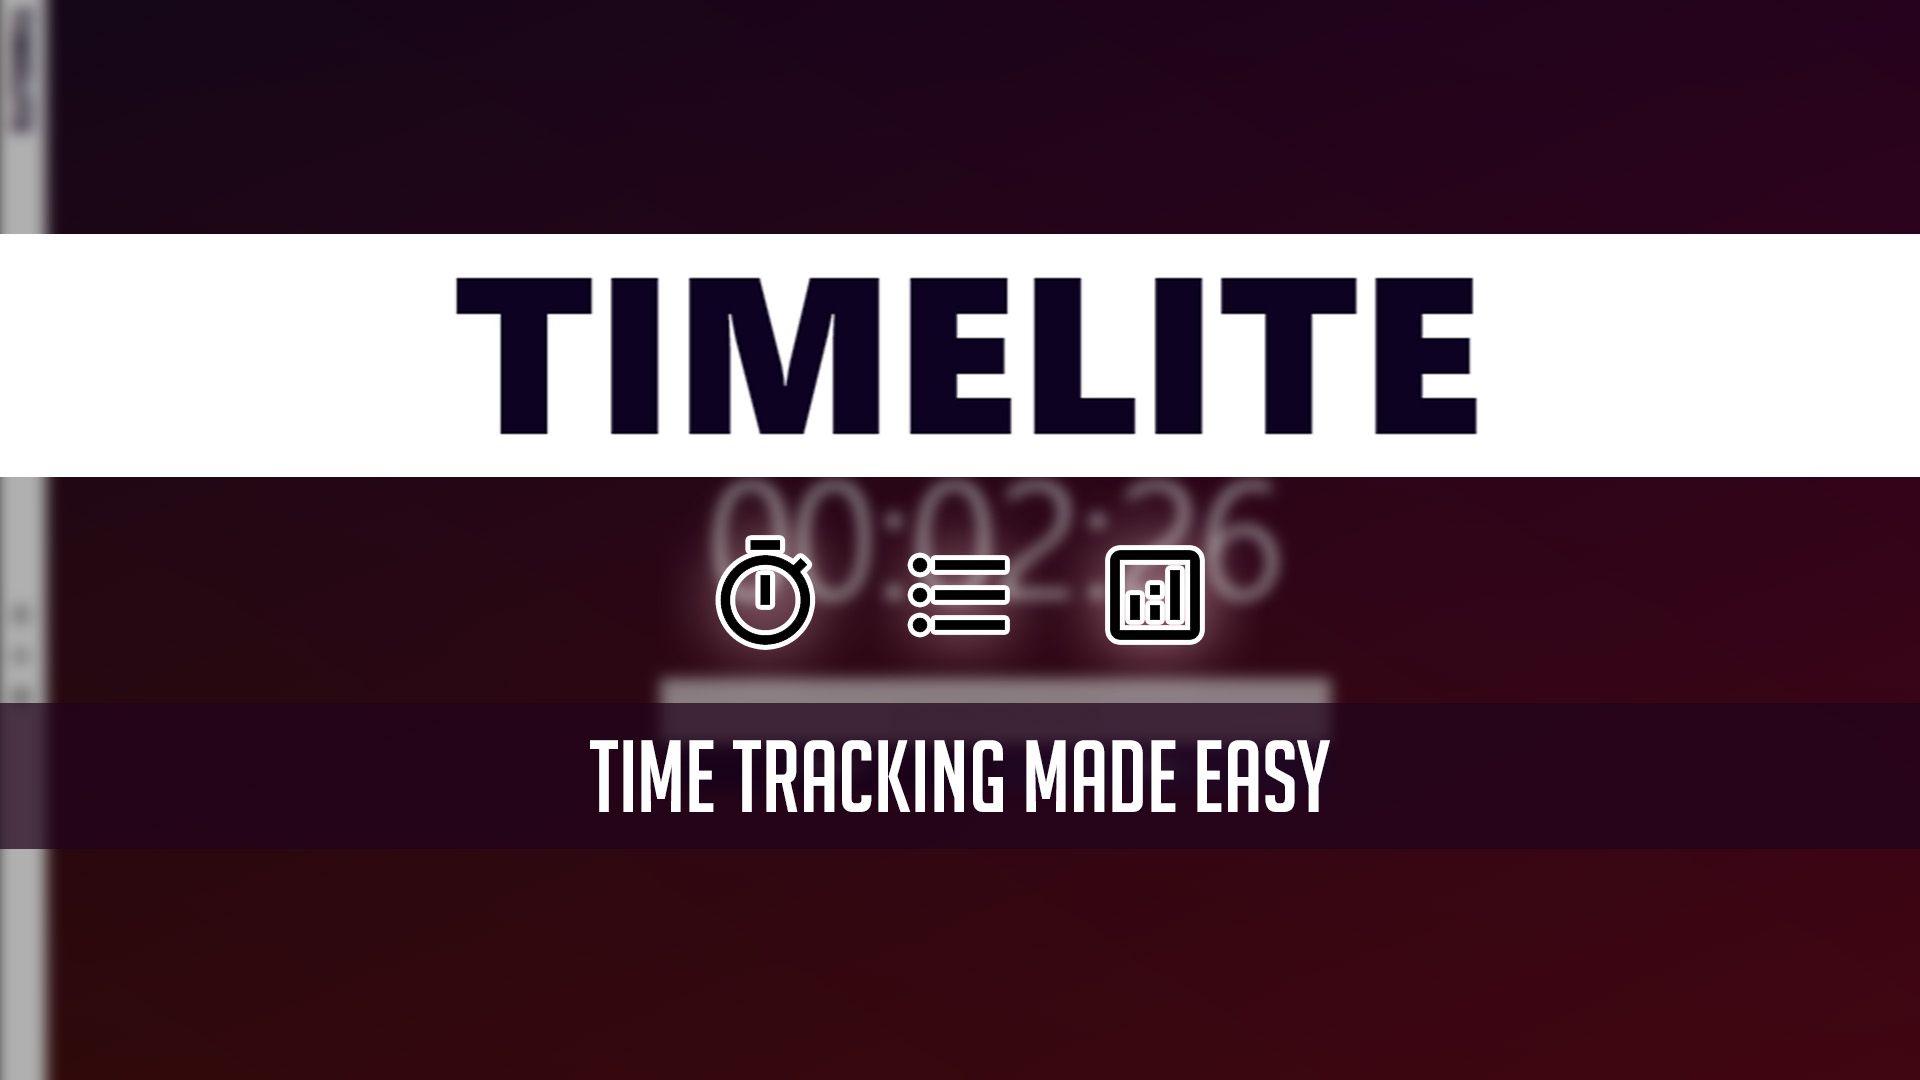 Timelite: The Easiest Time Tracking Tool You'll Ever Use